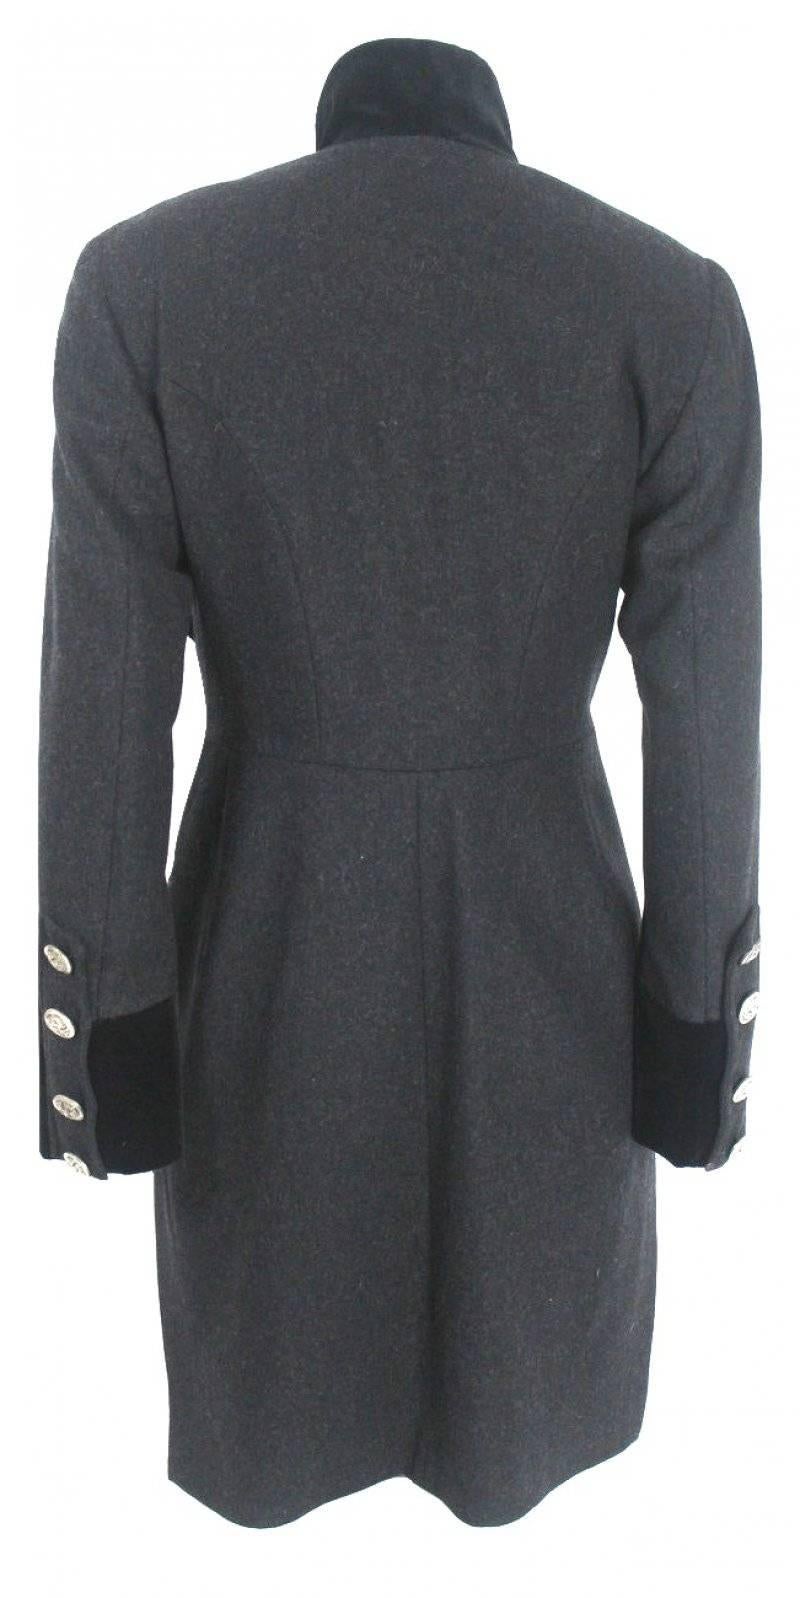 Women's Dolce & Gabbana Military Tailcoat and Vest